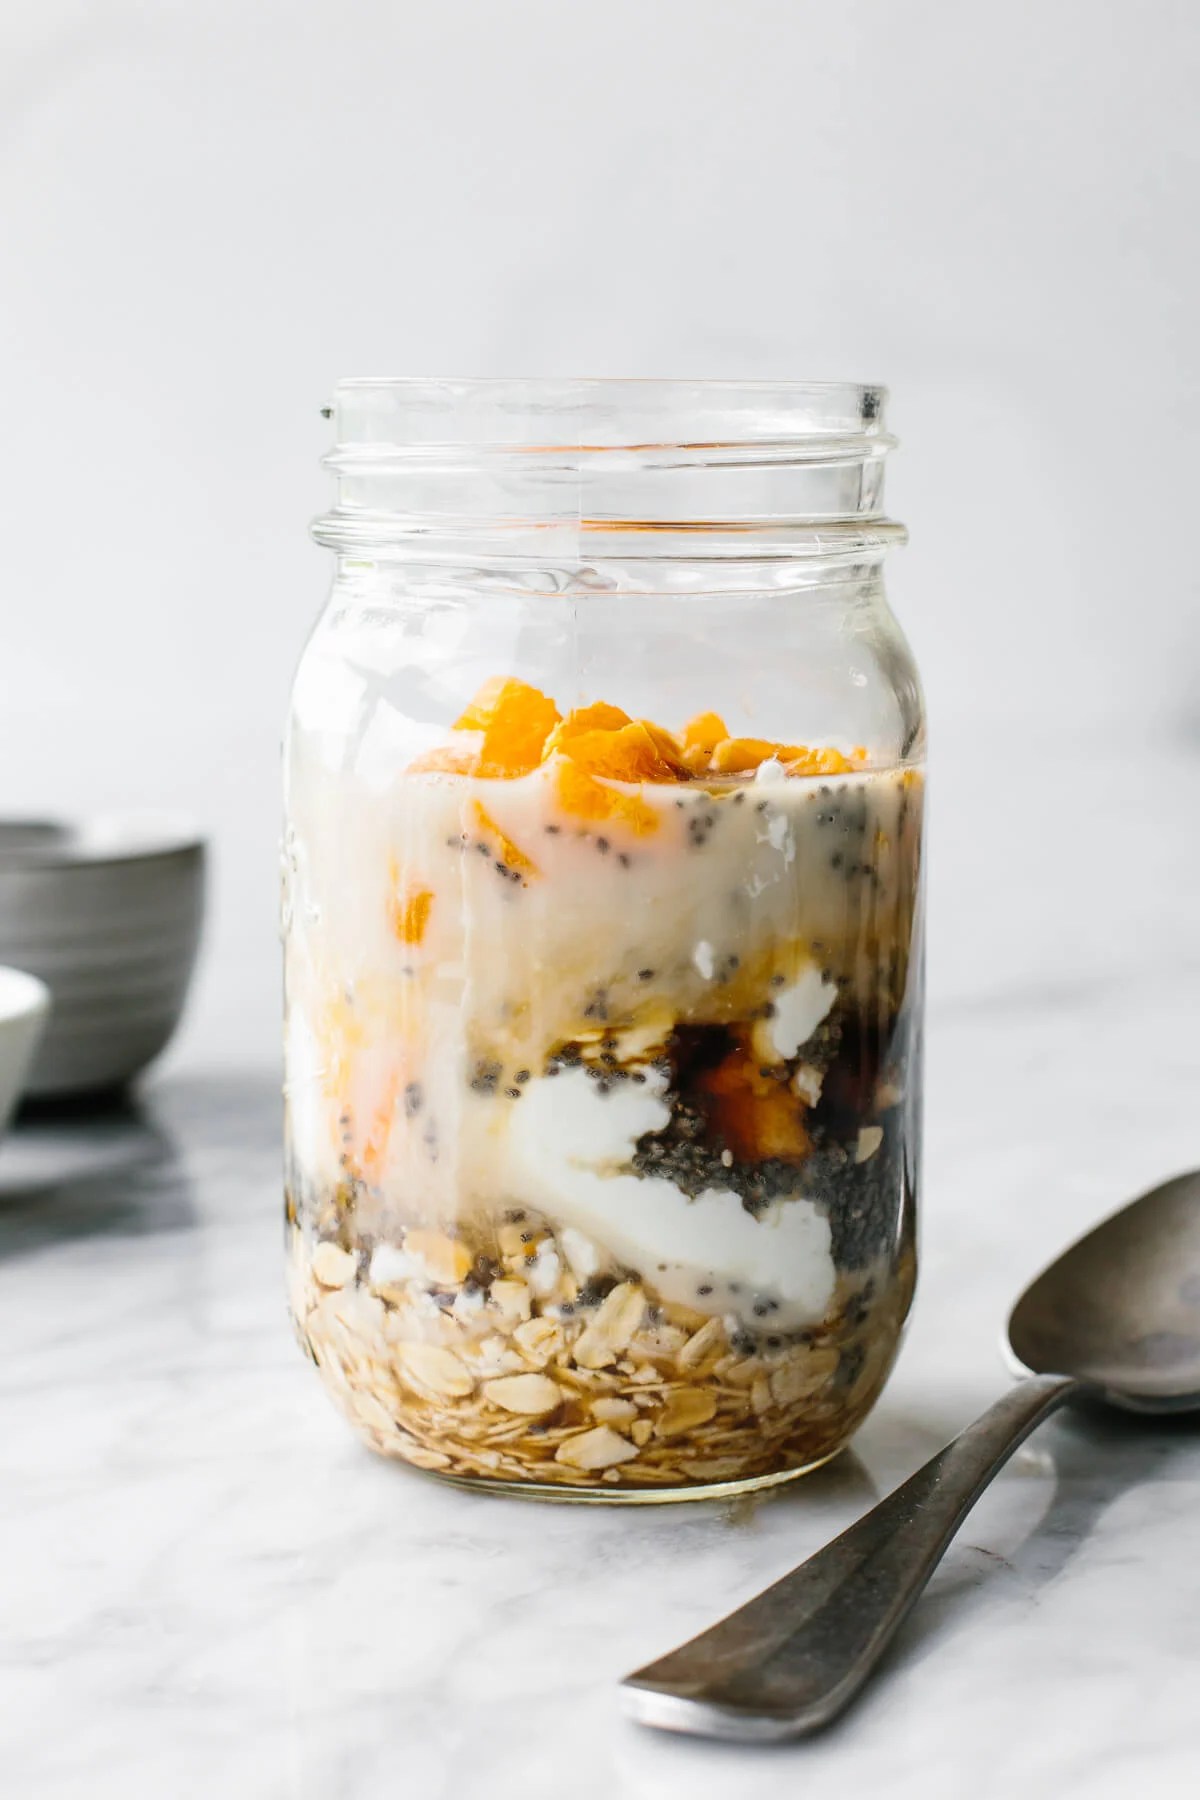 Adding orange creamsicle overnight oats ingredients into a jar